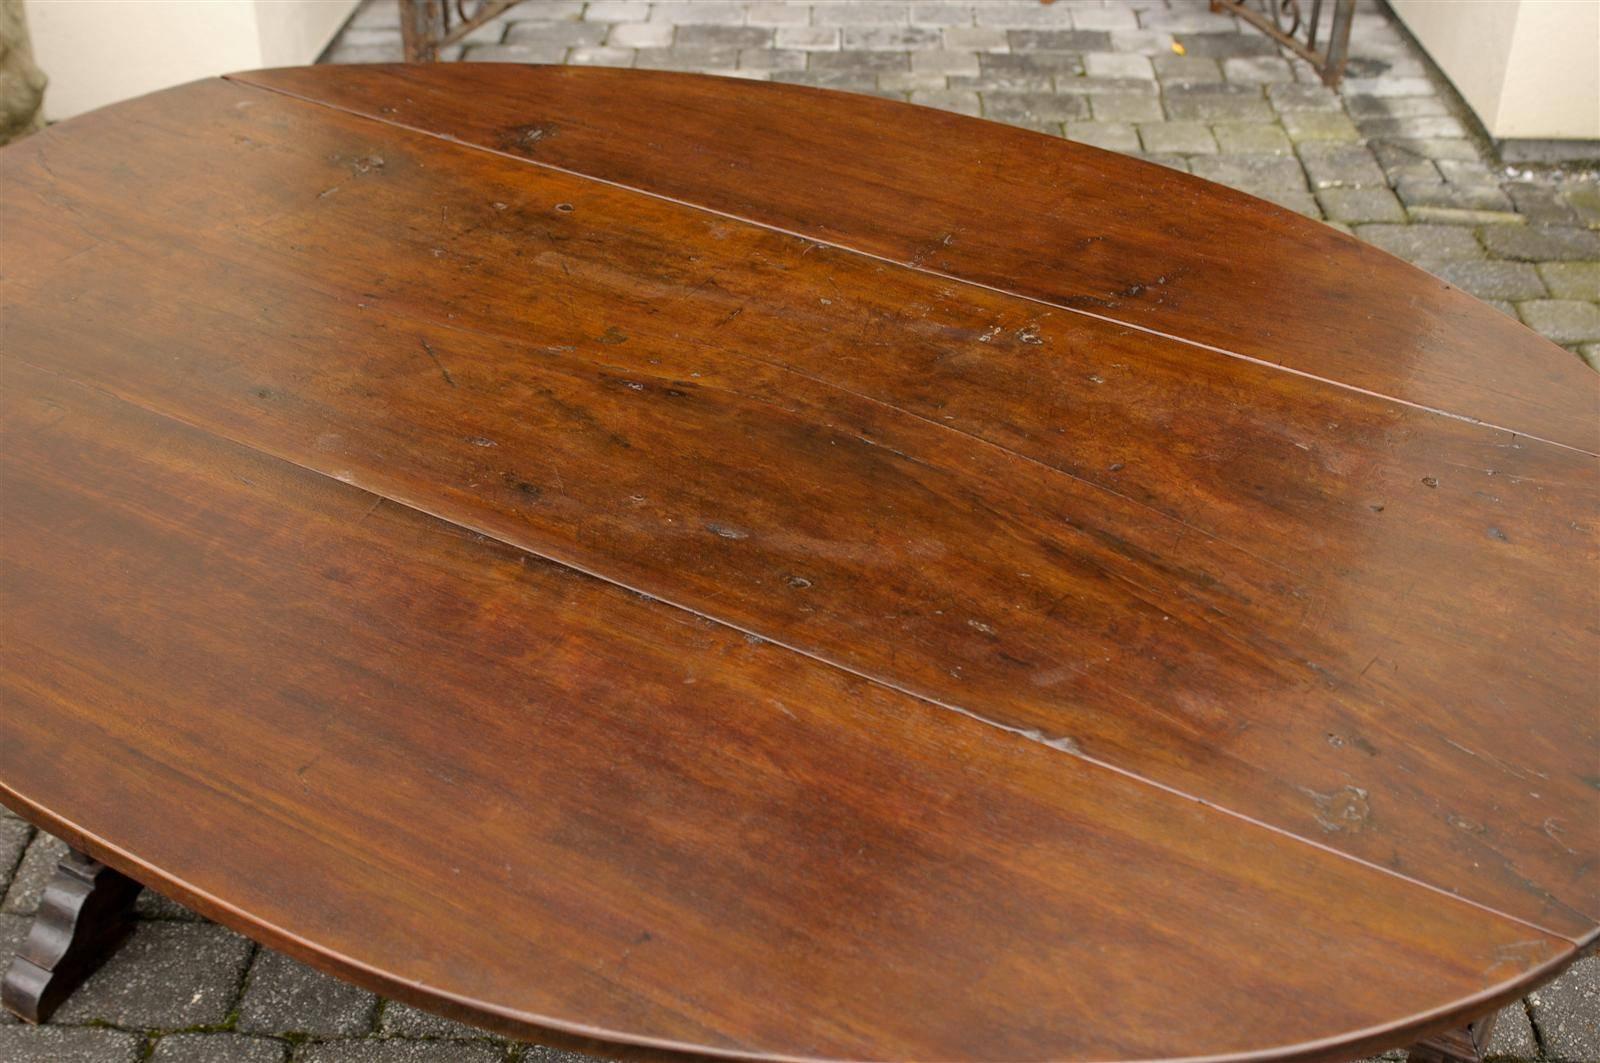 Wood Oval Italian Walnut Drop-Leaf Table from the Late 18th Century with Trestle Base